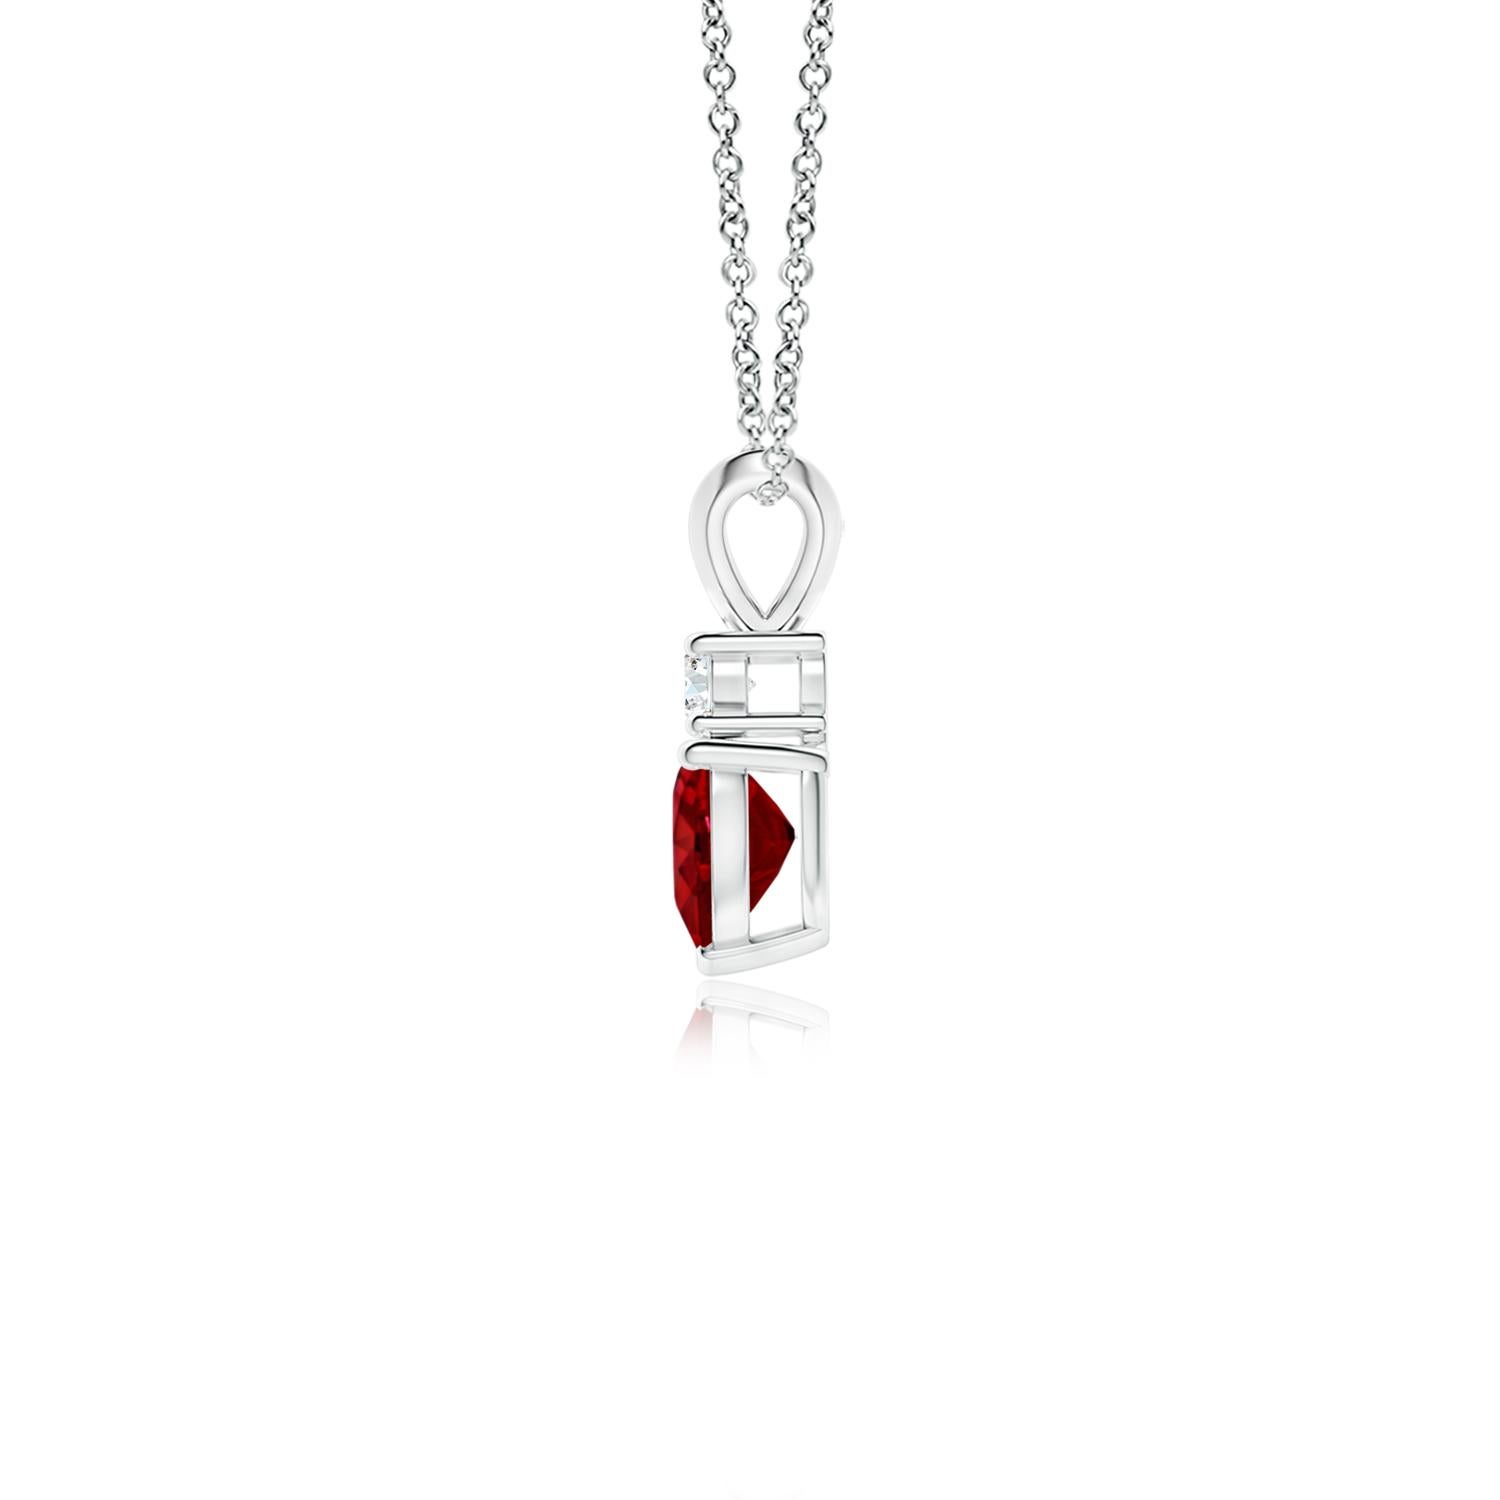 This heart-shaped ruby pendant in platinum is a beautiful symbol of love. The bold red gem is topped with a glittering round diamond and linked to a rabbit ear bale.
Ruby is the birthstone for July and the traditional gemstone gift for the 15th &